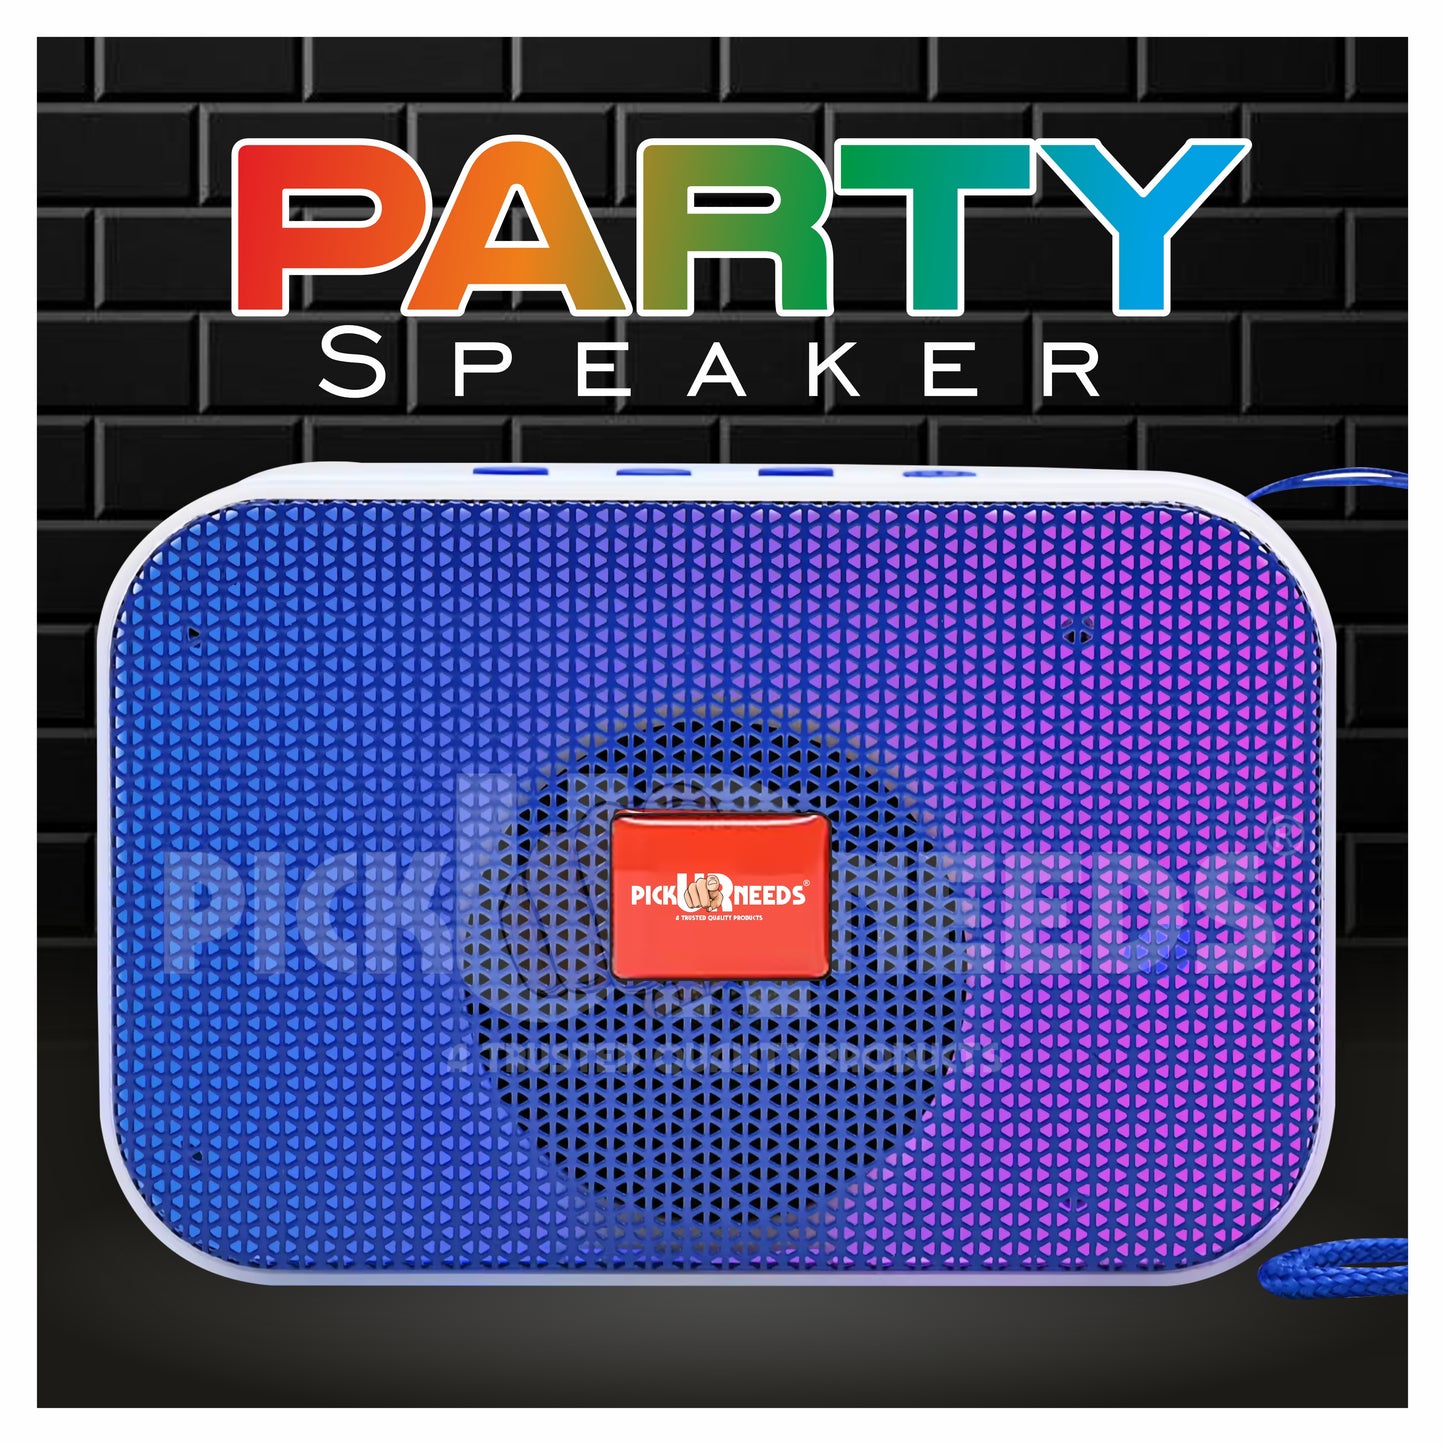 Pick Ur Needs Portable Wireless Speakers With Disco RGB Light TF Card / USB Device Supported 5 W Bluetooth Speaker (Black, 5.0 Channel)